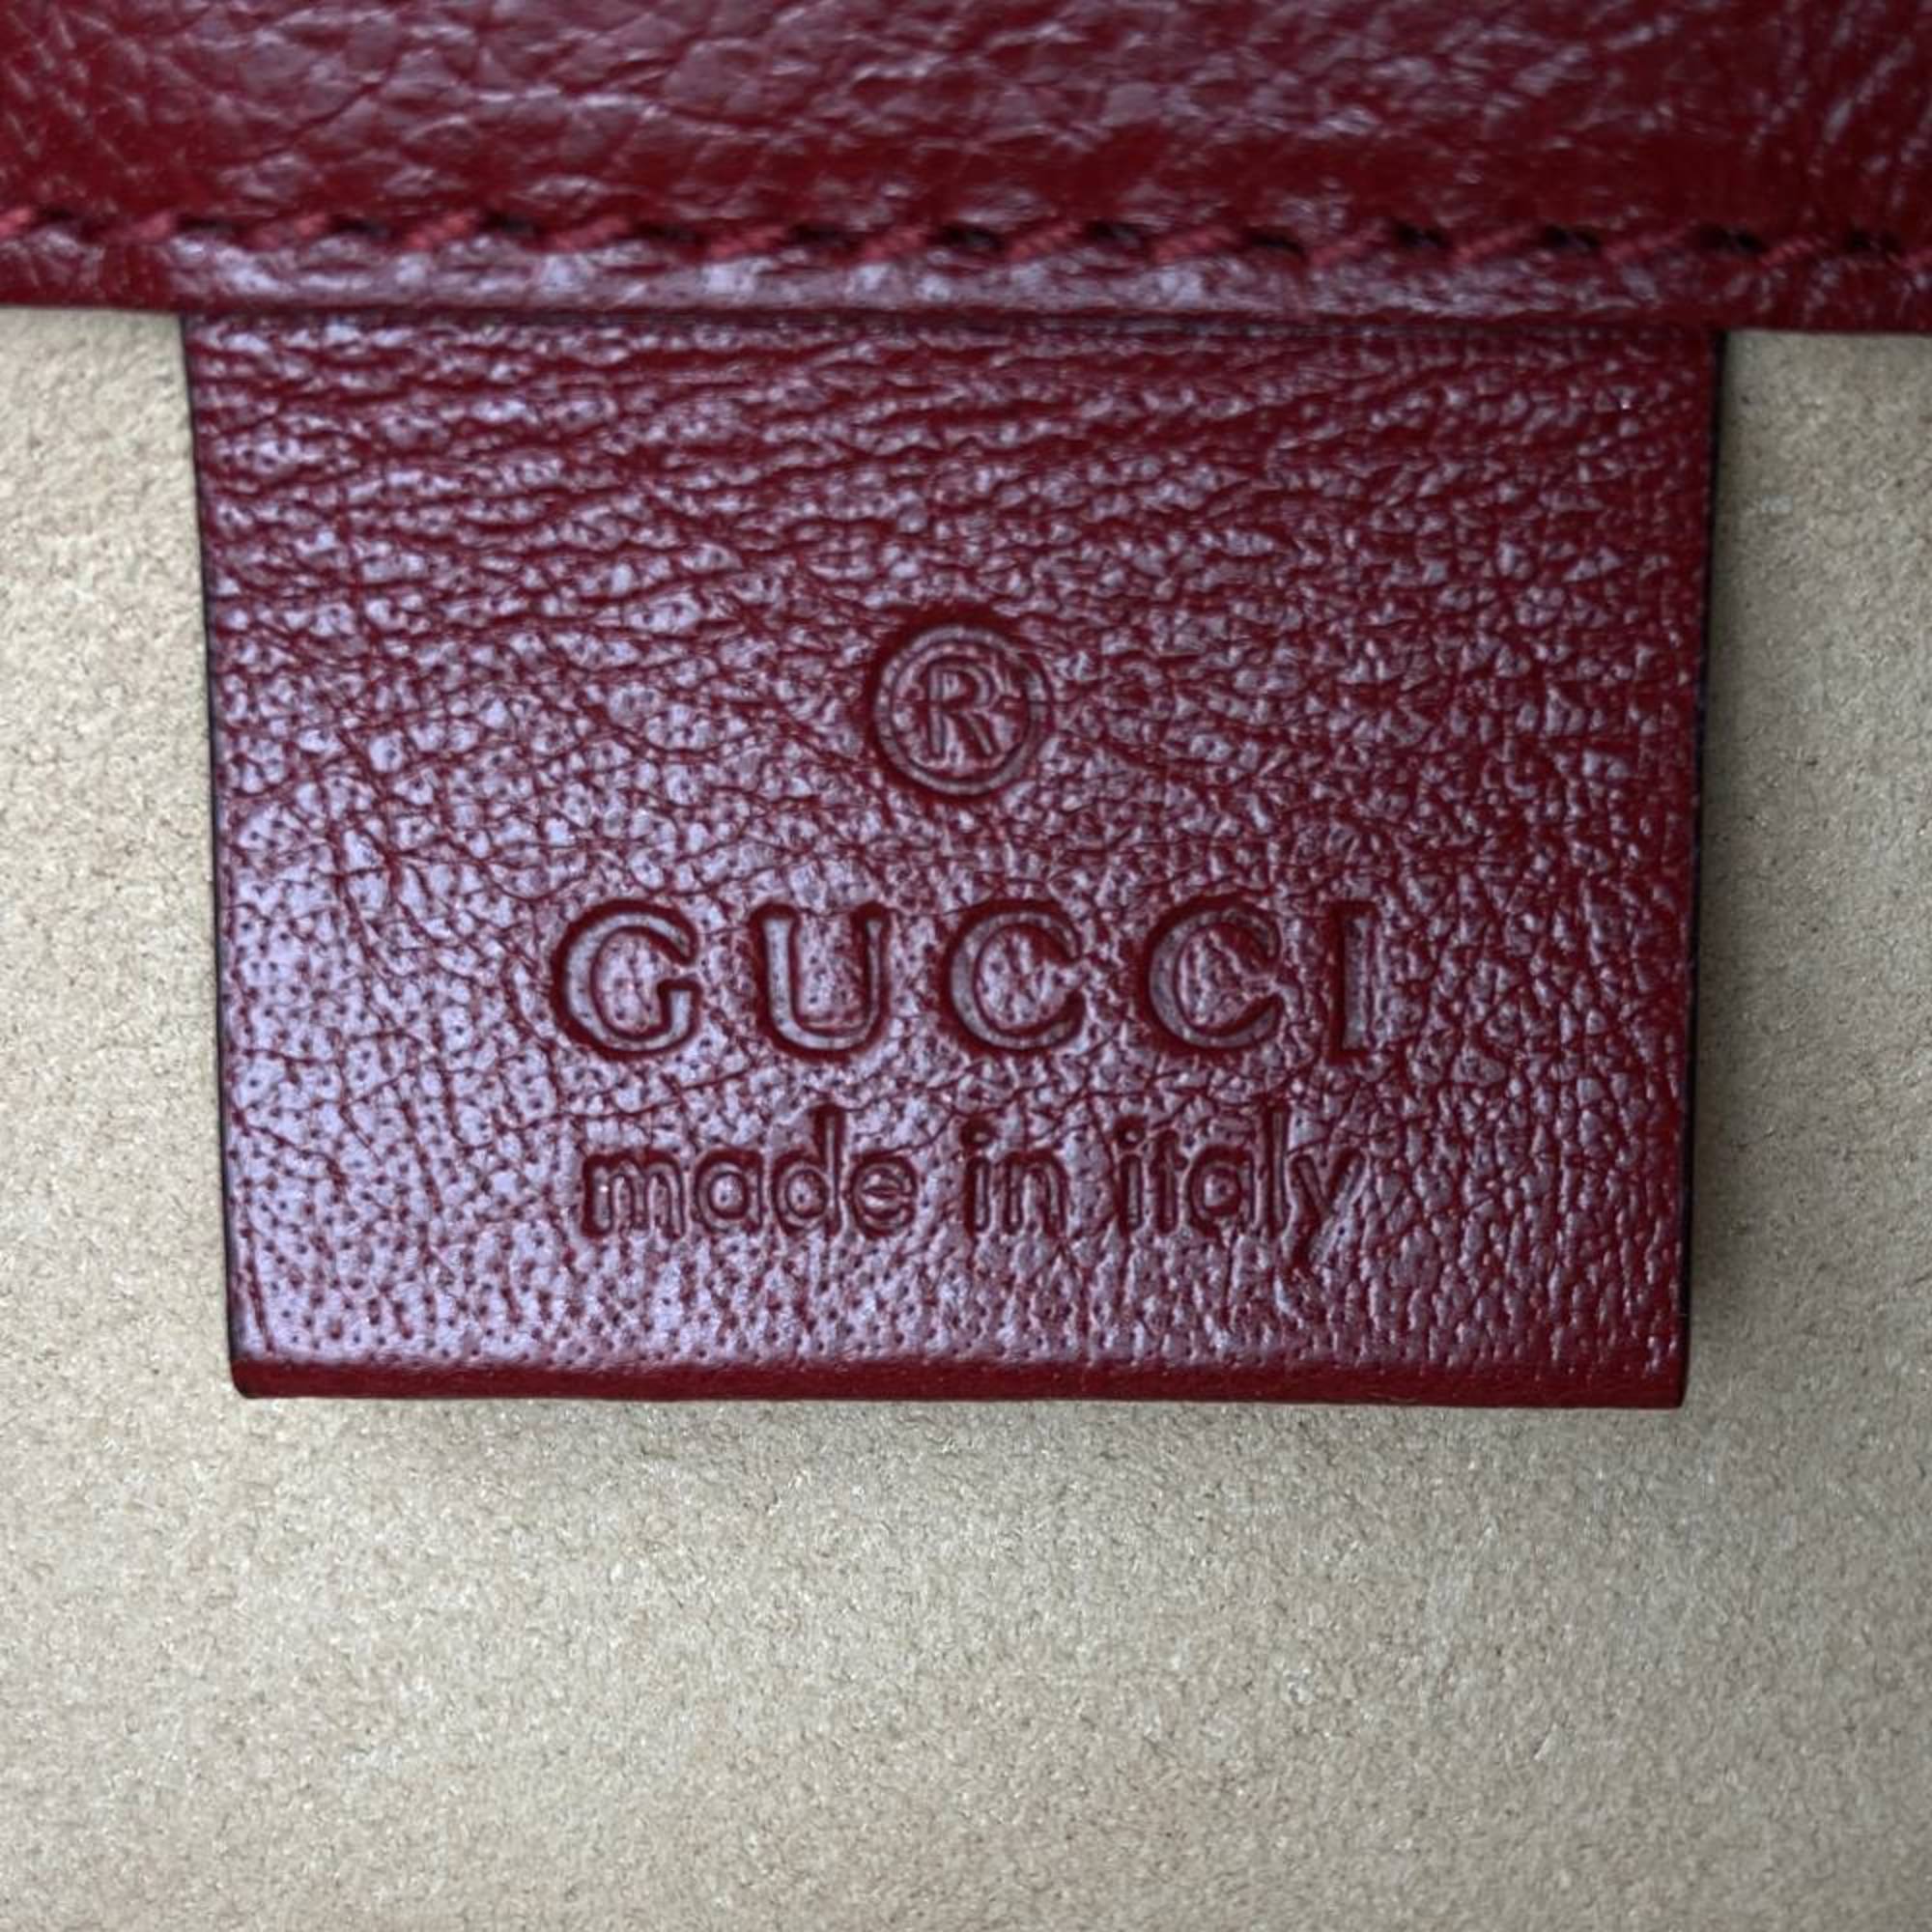 Gucci Shoulder Bag, Sherry Line, Tassel, Navy, Red, Suede, Leather, Women's, 550620, GUCCI